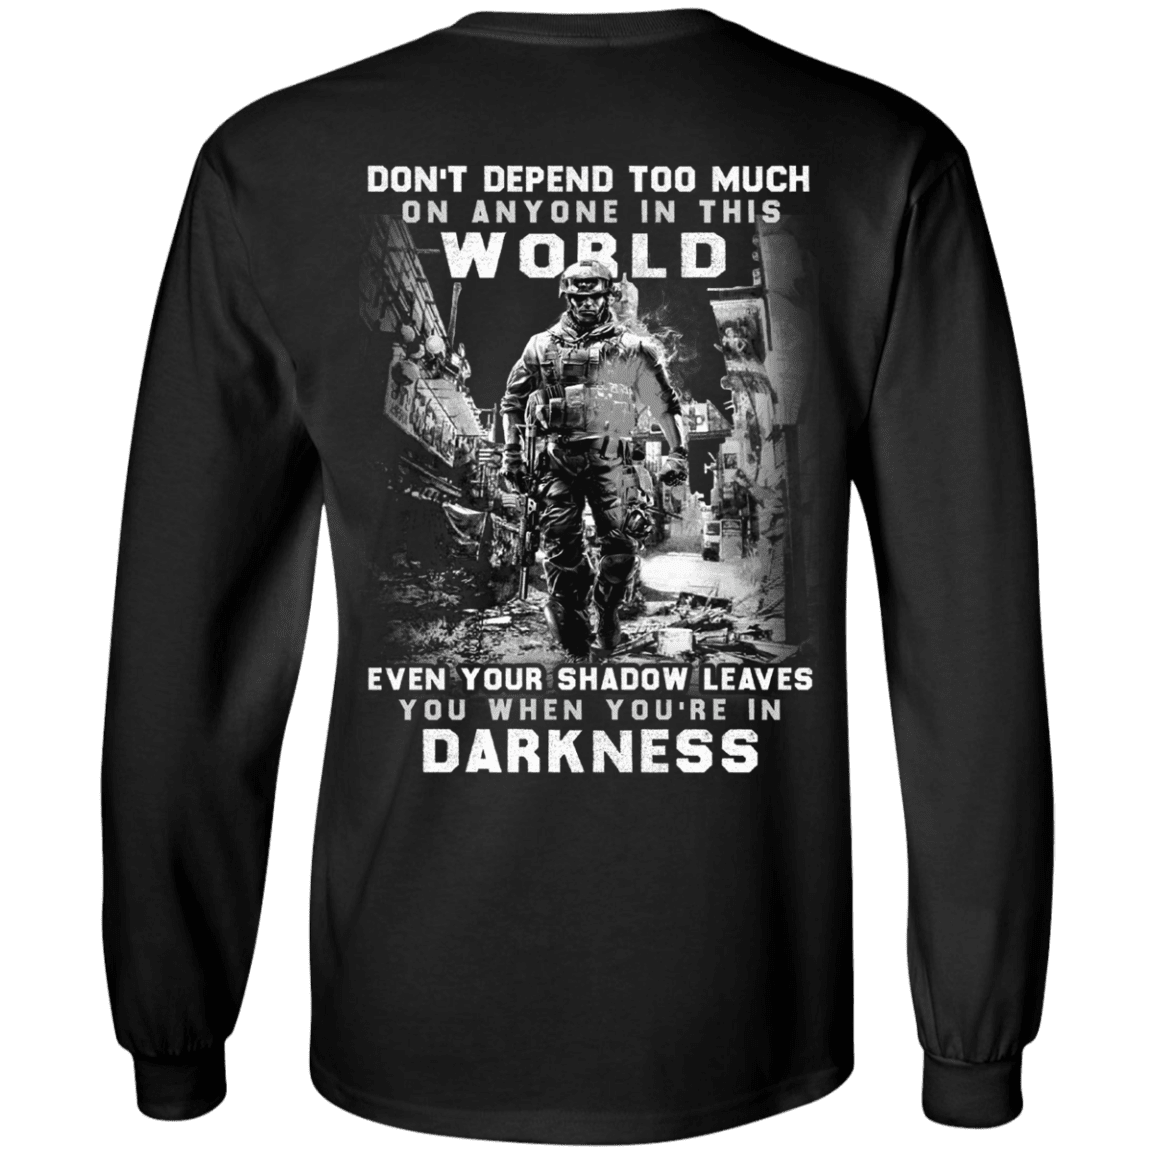 Military T-Shirt "Veteran - Don't Defend Too Much Anyone In This World"-TShirt-General-Veterans Nation